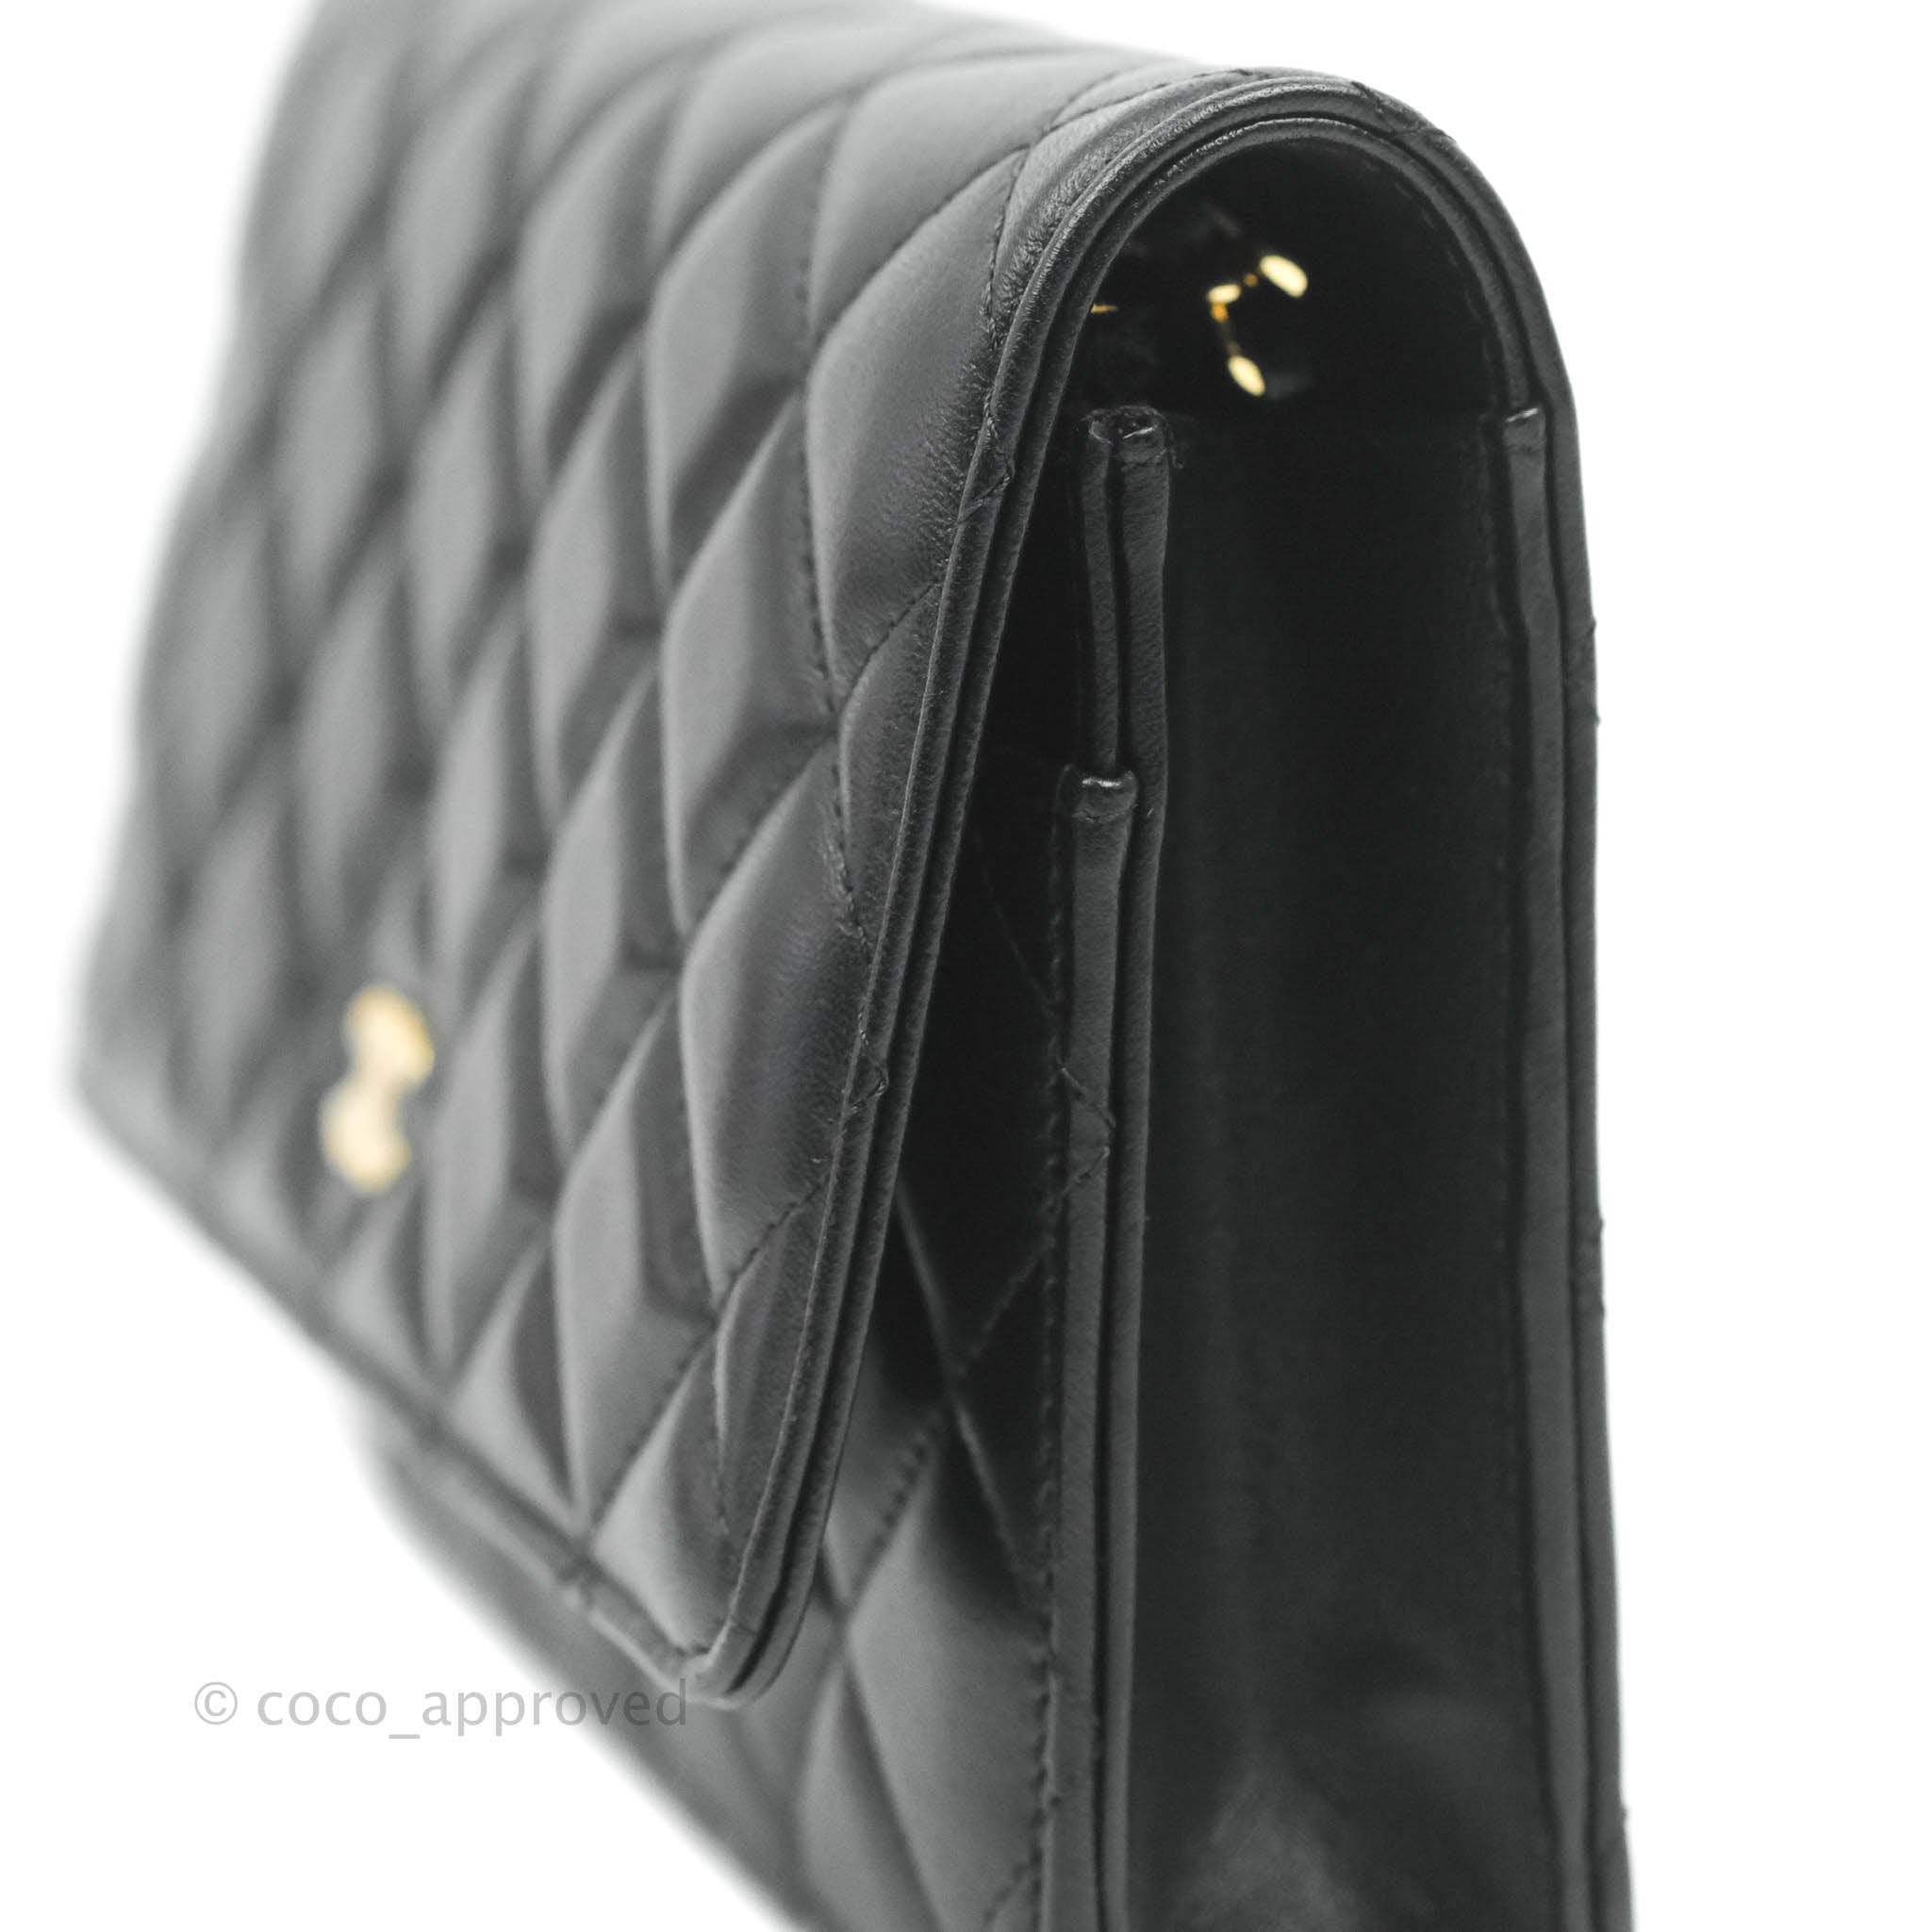 Chanel Black Quilted Lambskin Classic Wallet On Chain Gold